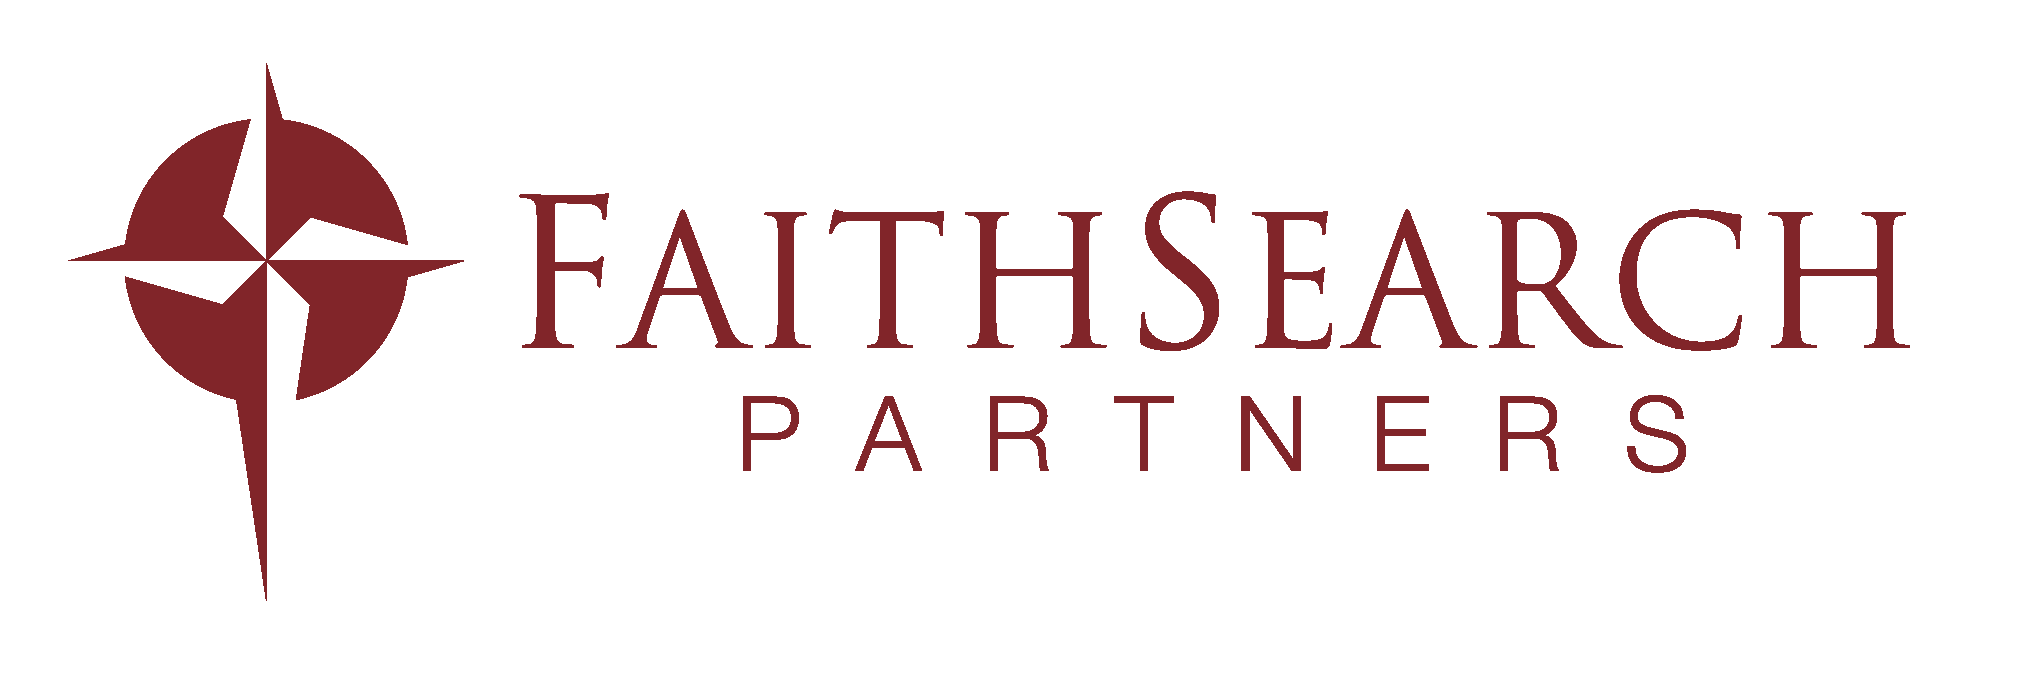 FaithSearch Partners RED_transparent.png